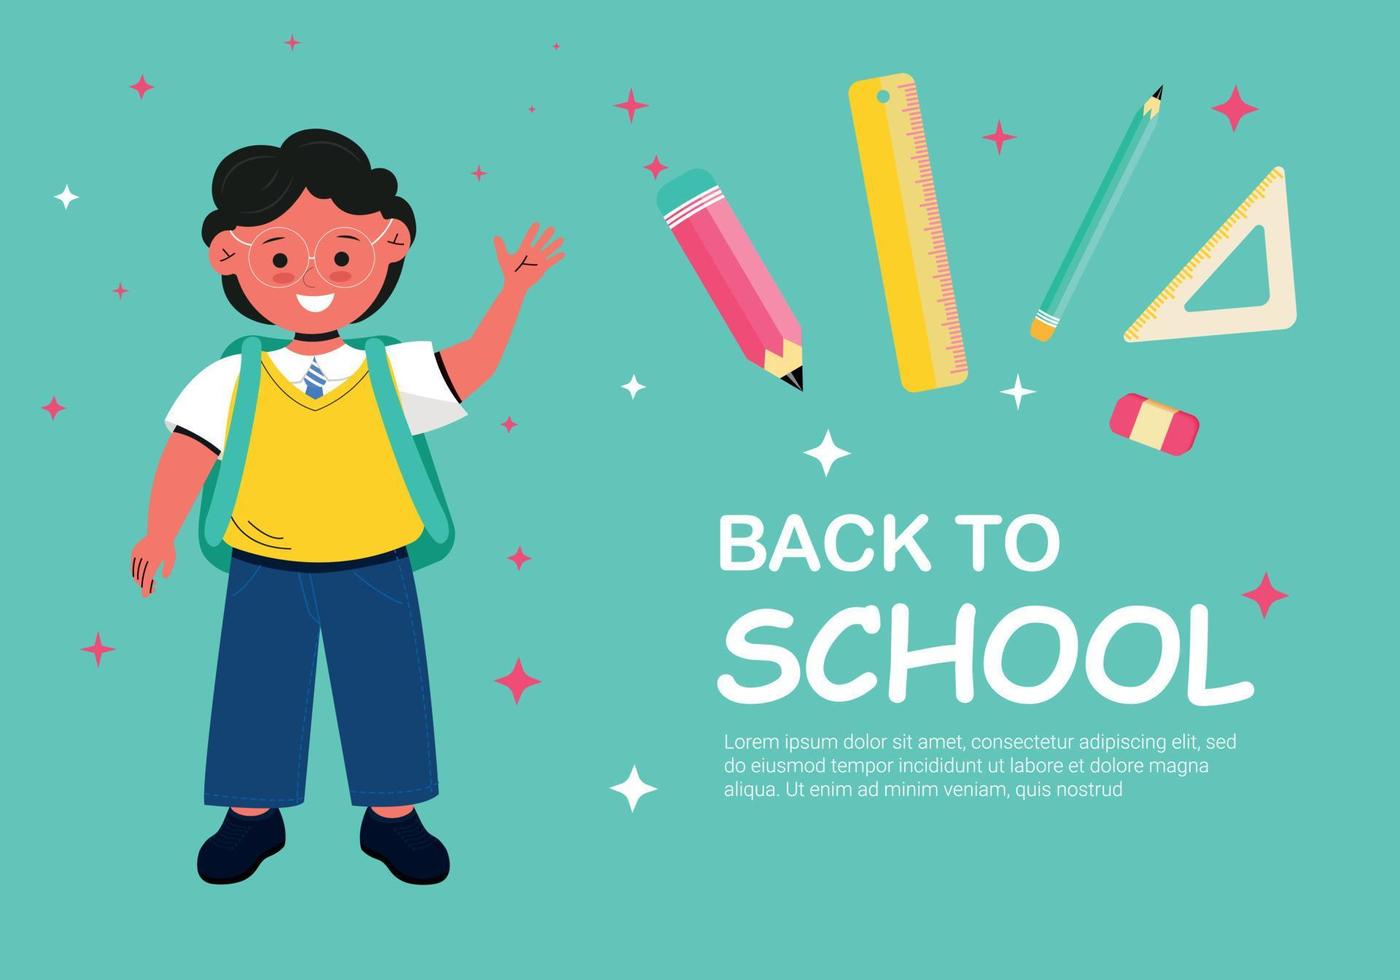 Banner Back to school with a smiling student and school supplies. Colorful back to school template for invitation, poster, banner, promotion, sale, etc. school supplies cartoon illustration. Vector